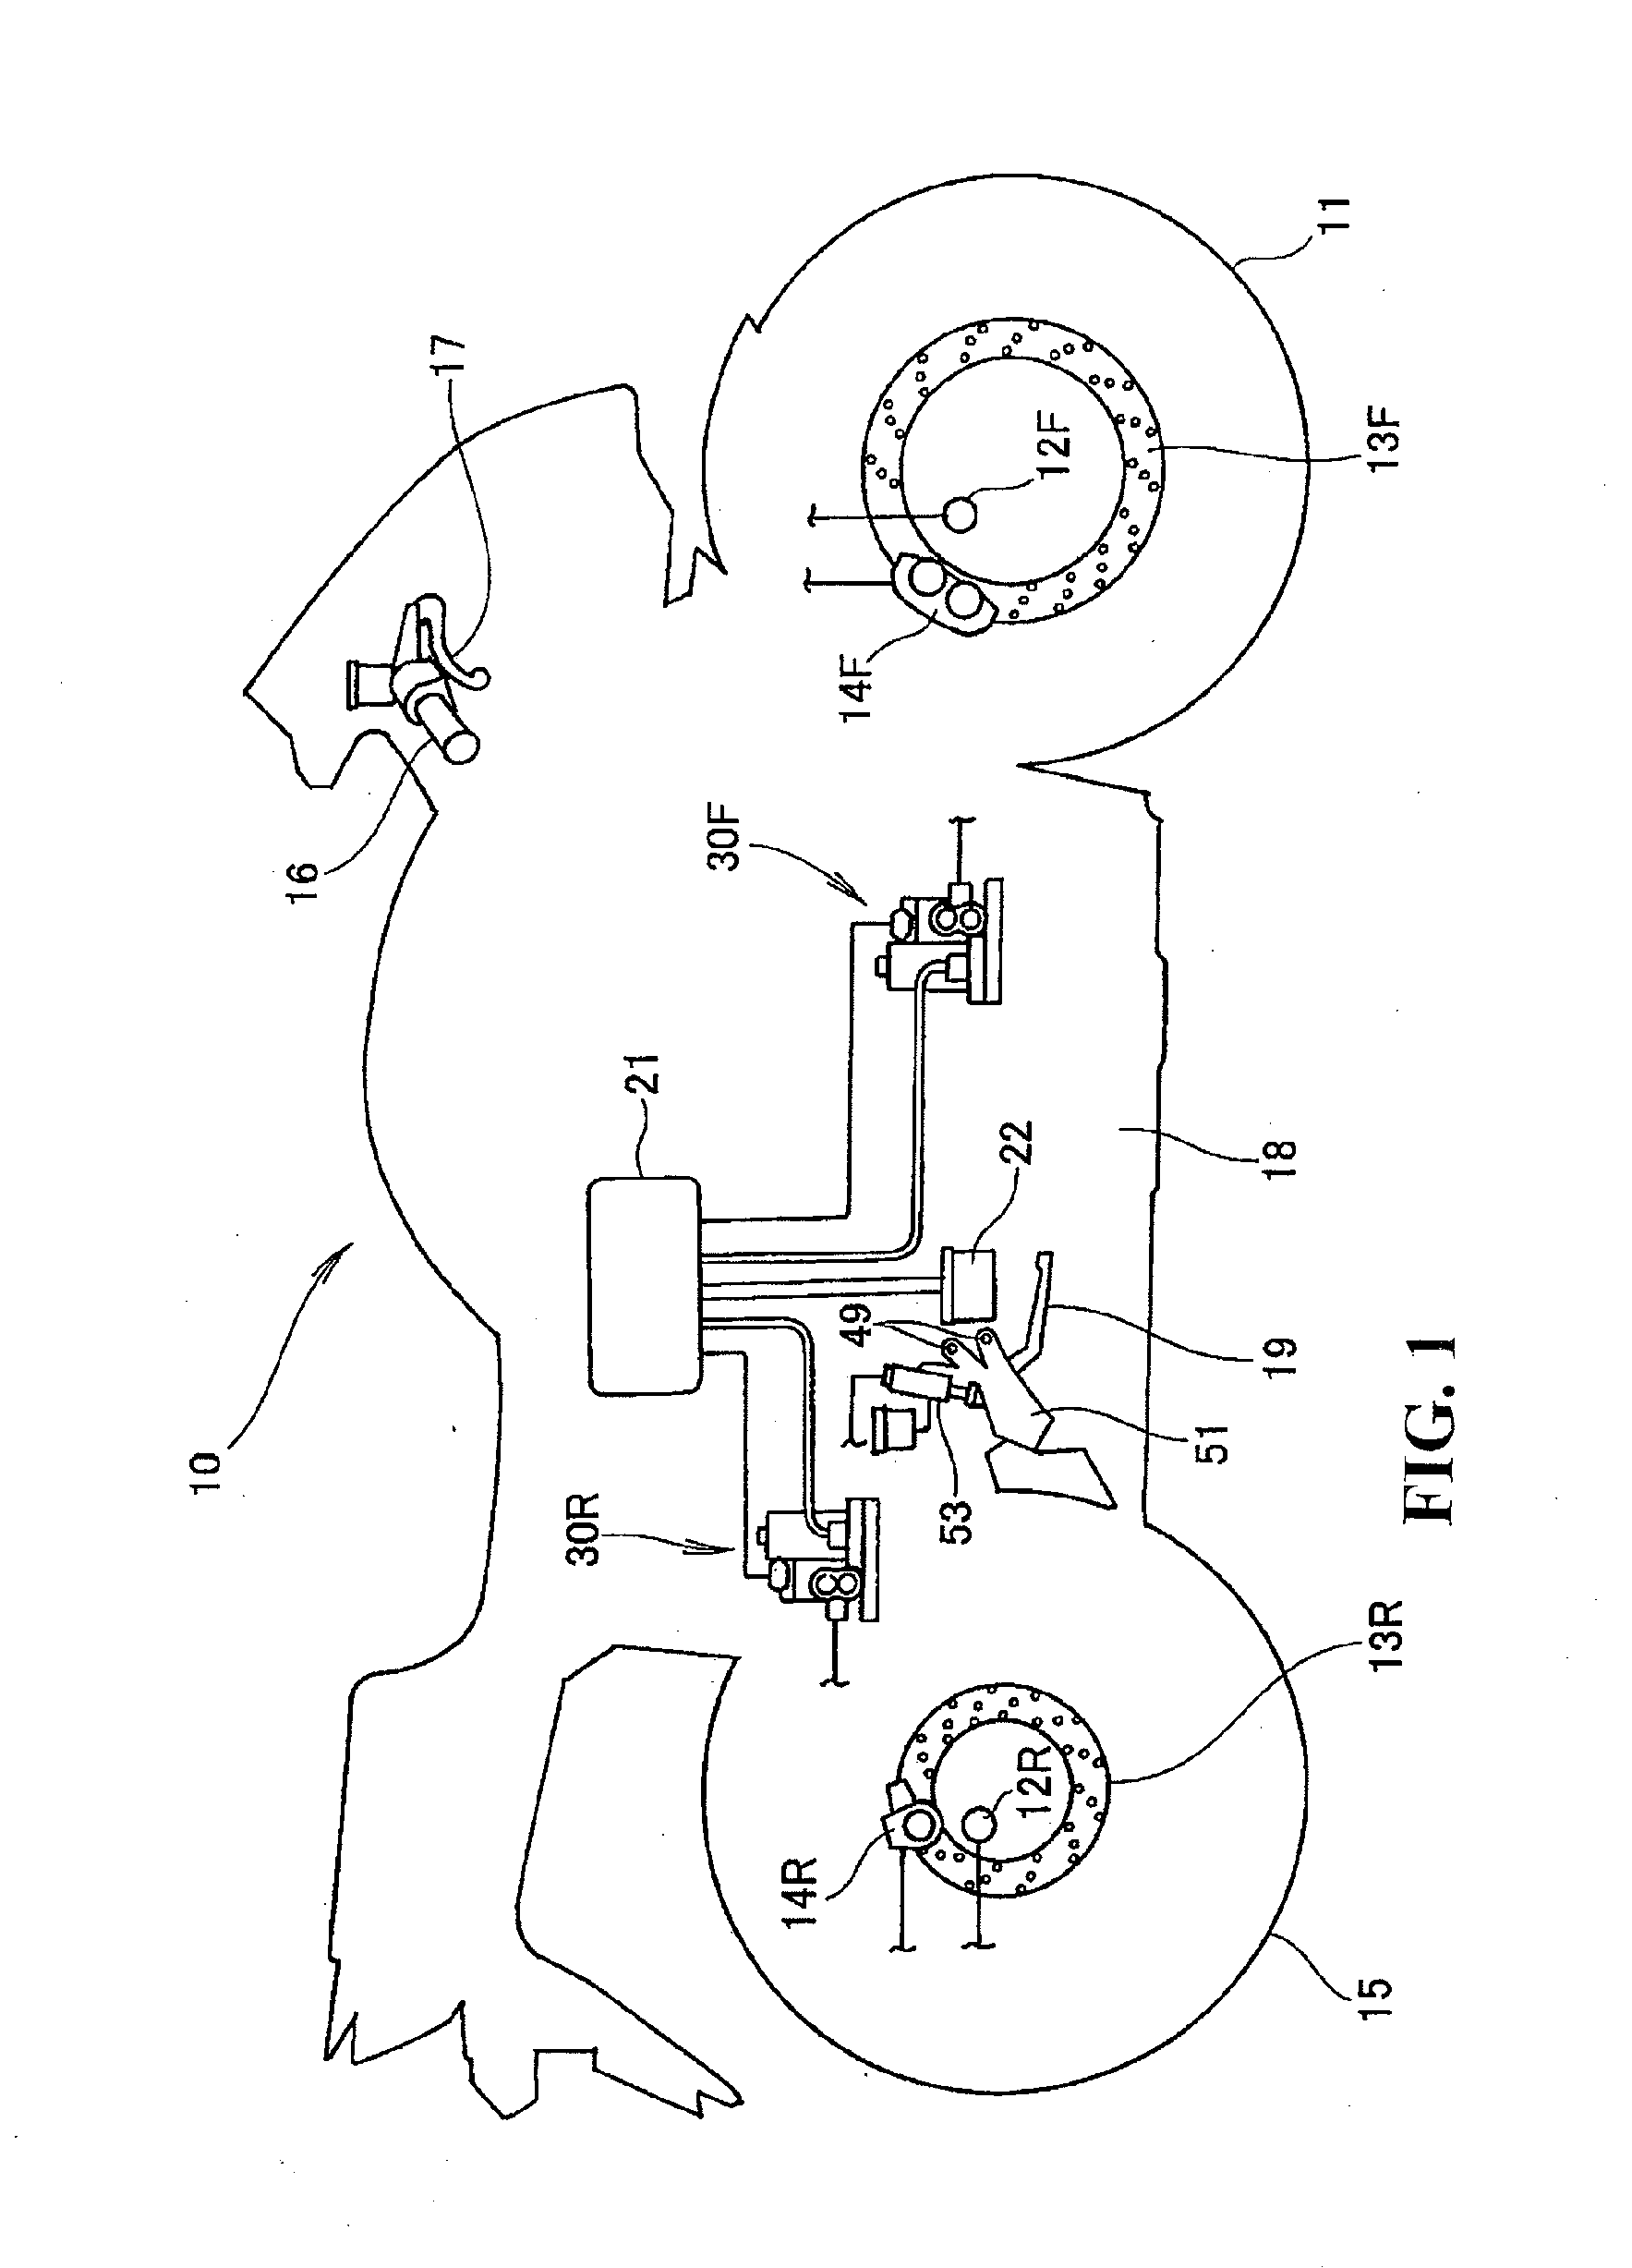 Brake device for motorcycle